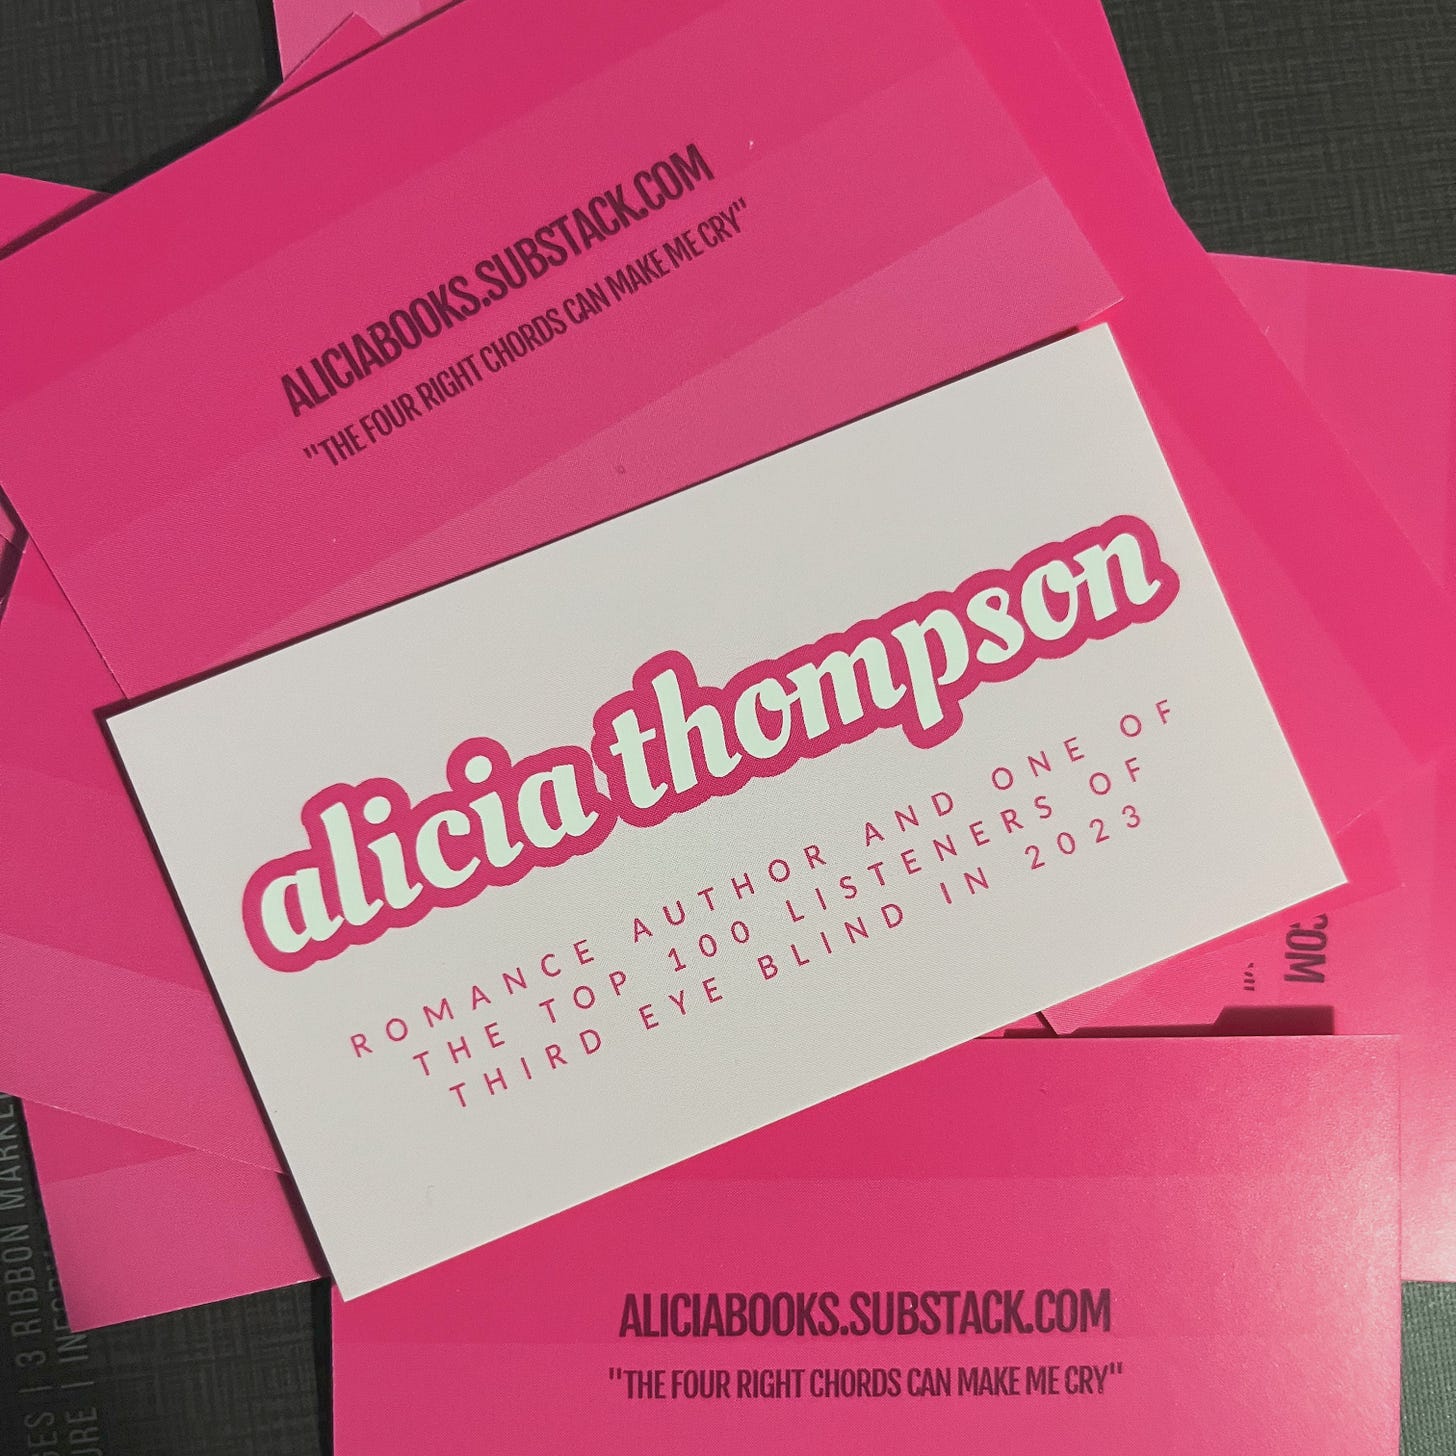 Picture of my Barbie-pink business cards that say "alicia thompson" and then "romance author and one of the top 100 listeners of third eye blind in 2023" on the front and then my substack address and "the four right chords can make me cry" quote on the back